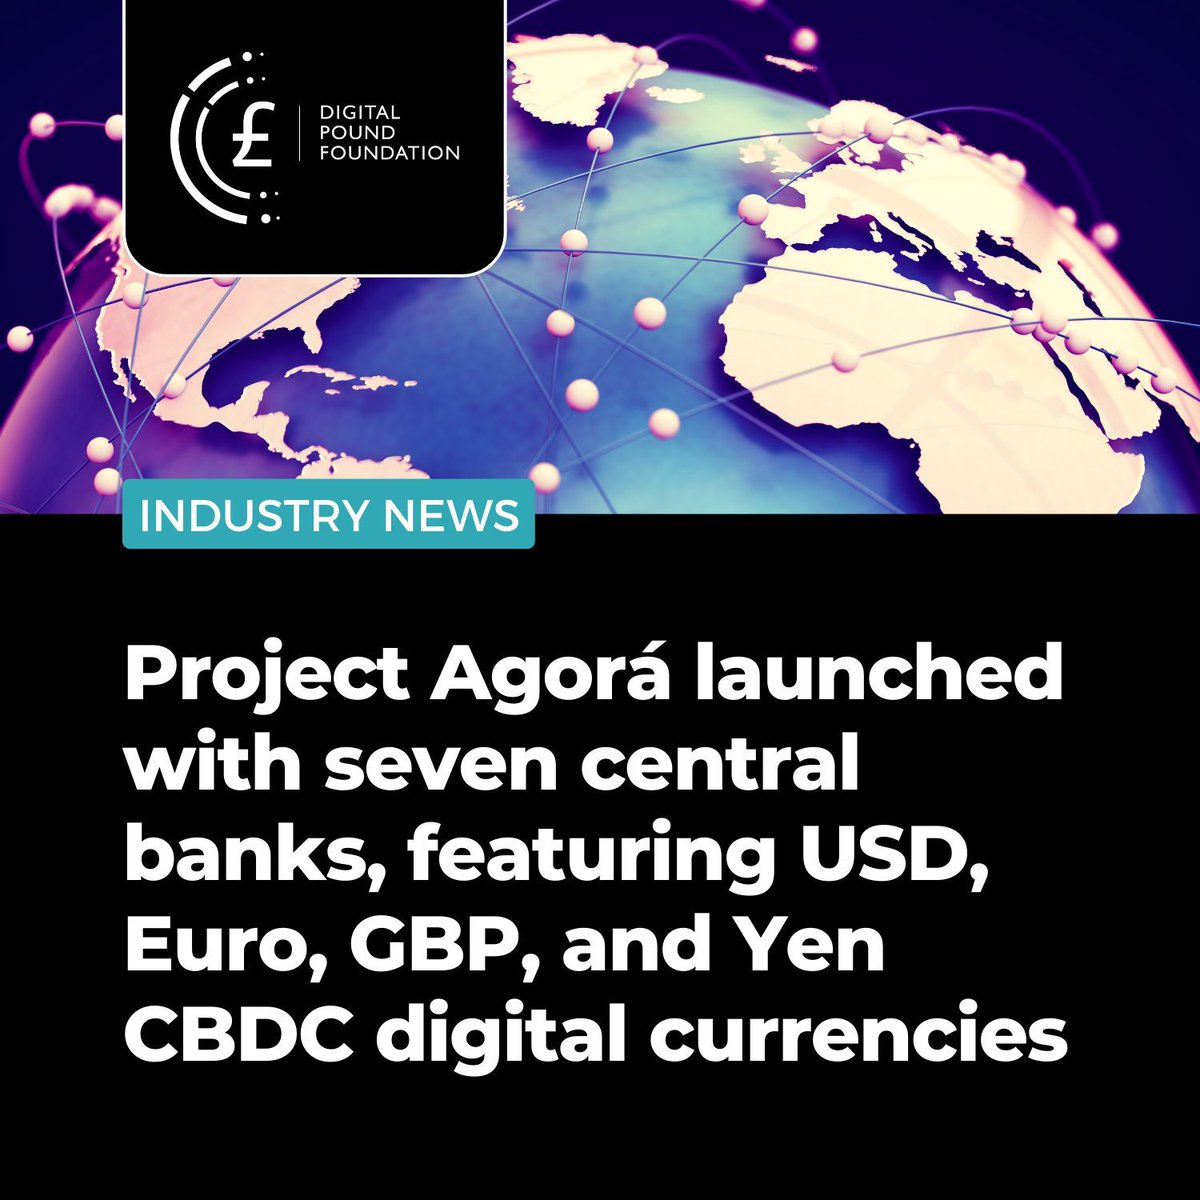 #ProjectAgorá launched this week with seven #centralbanks, featuring #USD, #Euro, #GBP, and #Yen #CBDC #digitalcurrencies. The #US Federal Reserve Bank of New York has clarified that its involvement is solely for research and experimentation purposes 👉 buff.ly/49leZex